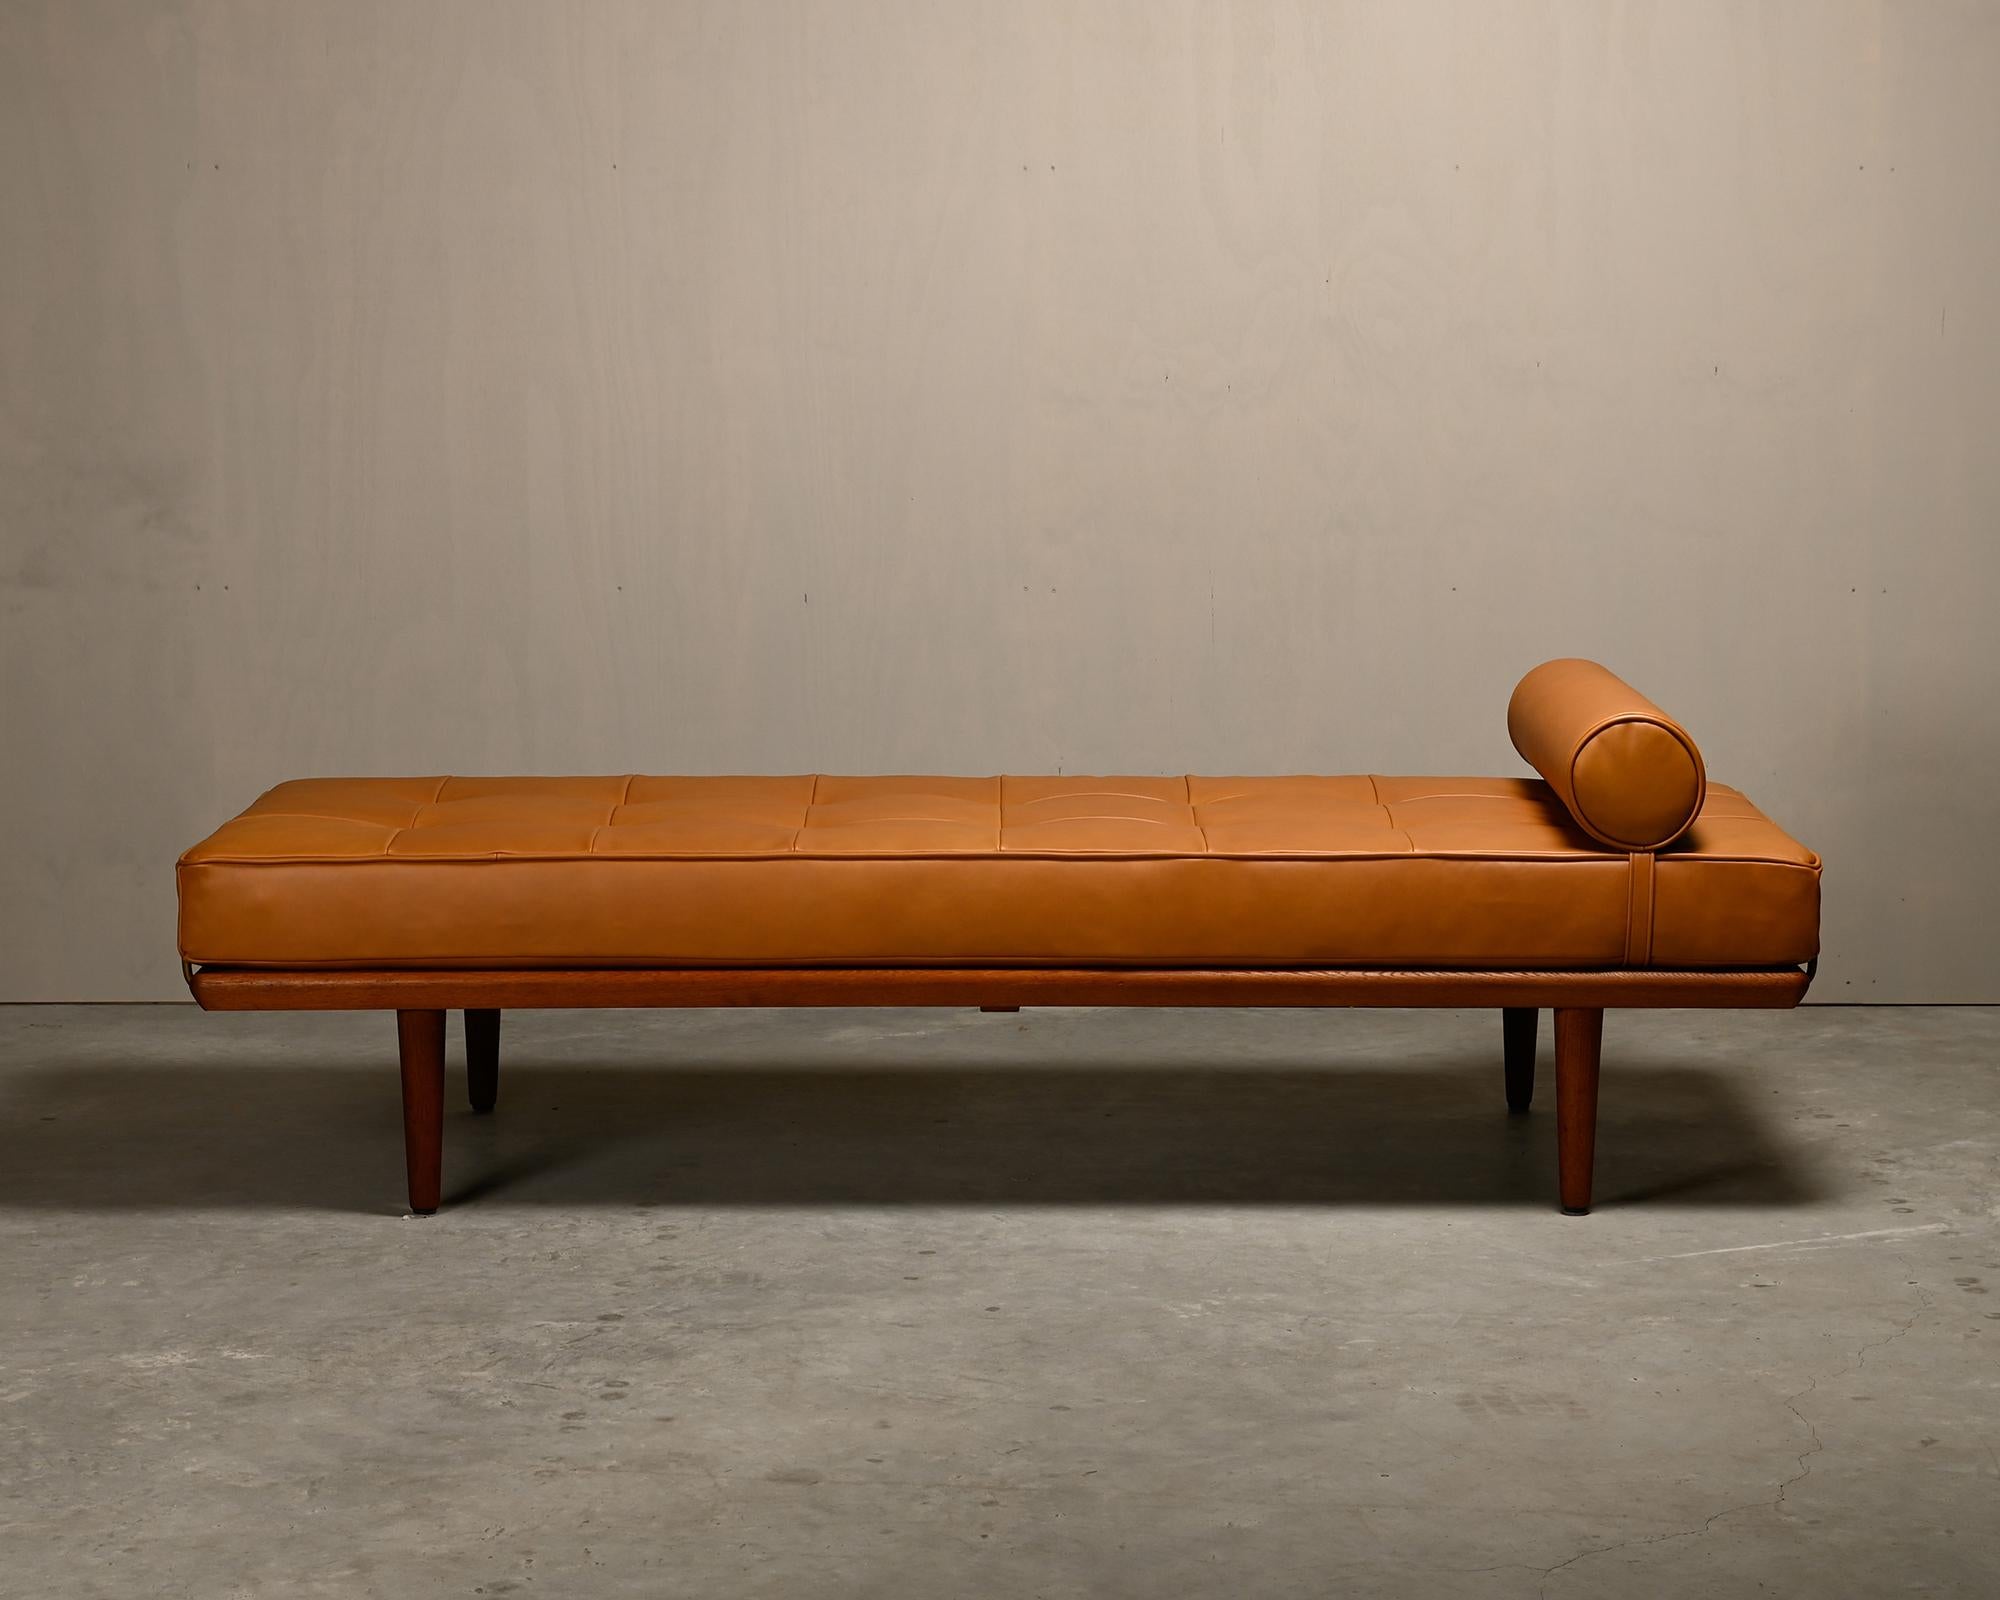 Mid-20th Century Hans J. Wegner GE19 Daybed with Teak and Camel Leather for Getama Denmark 1960s